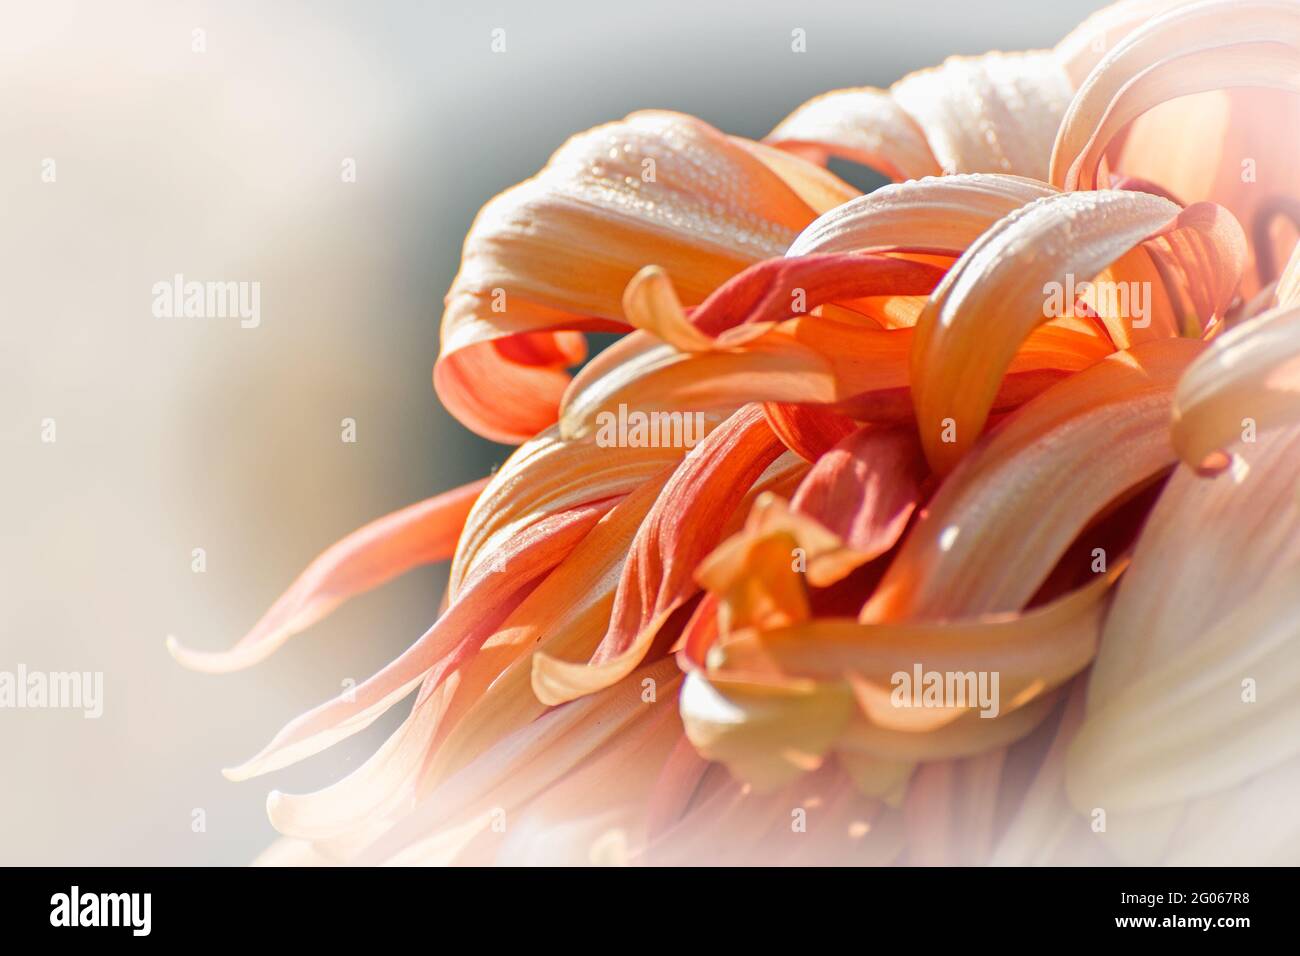 Artistic flower image, orange dahlia flower petals with shining dew drops on them, light color back ground, nature stock photograph Stock Photo